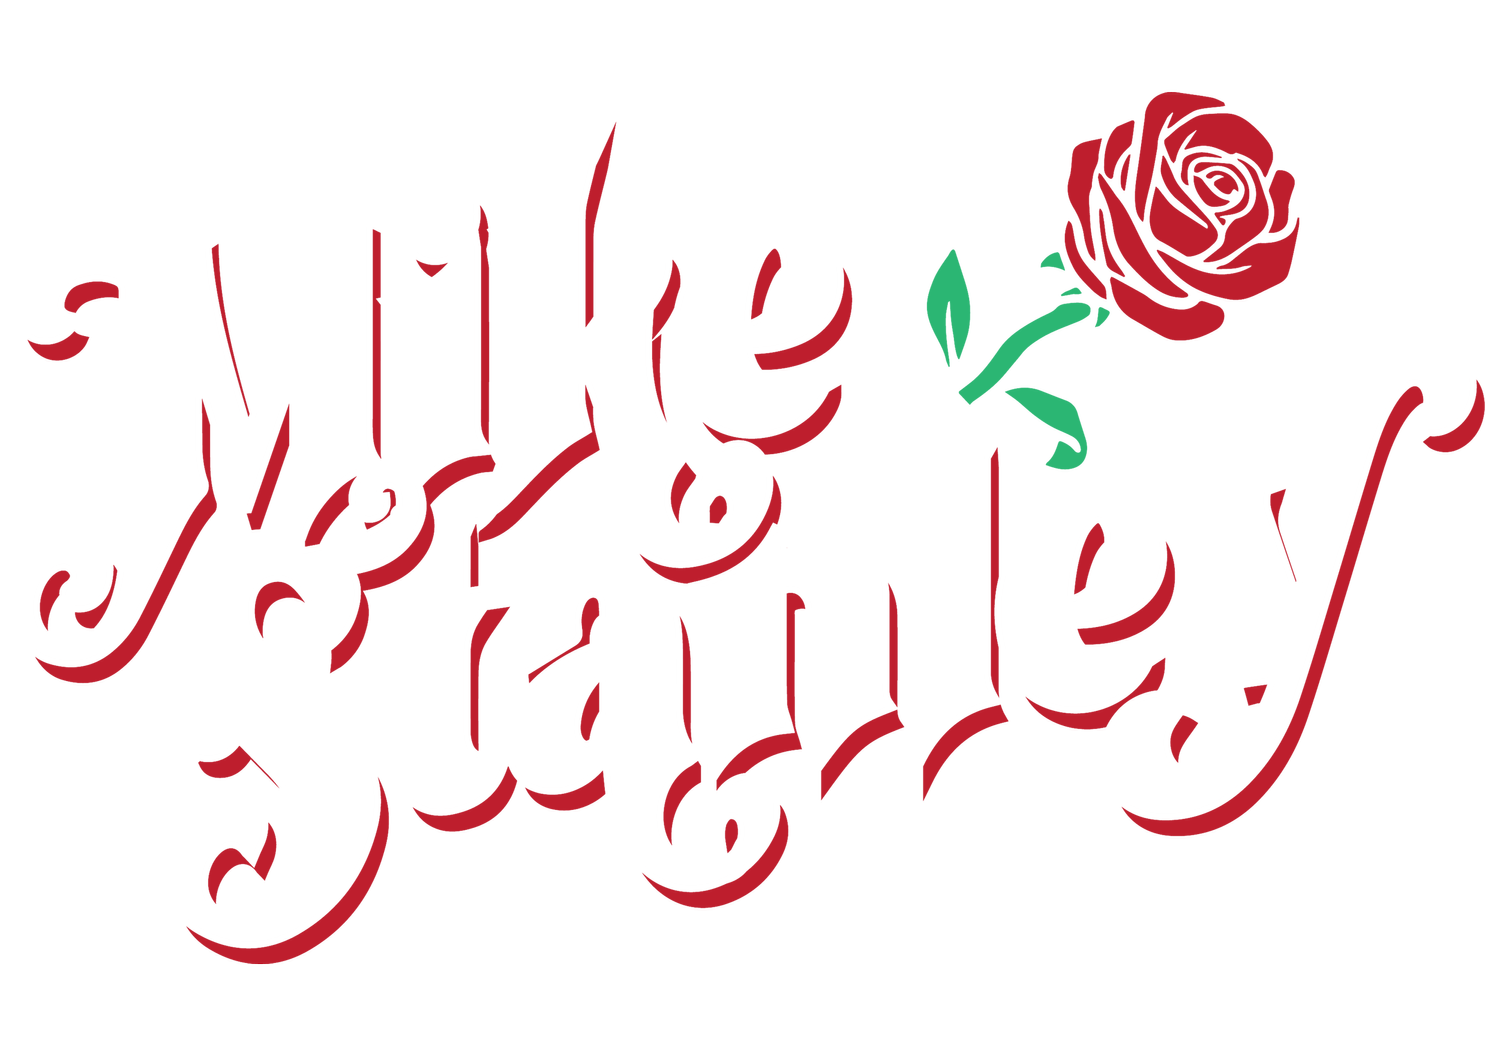 Mike Stanley Band